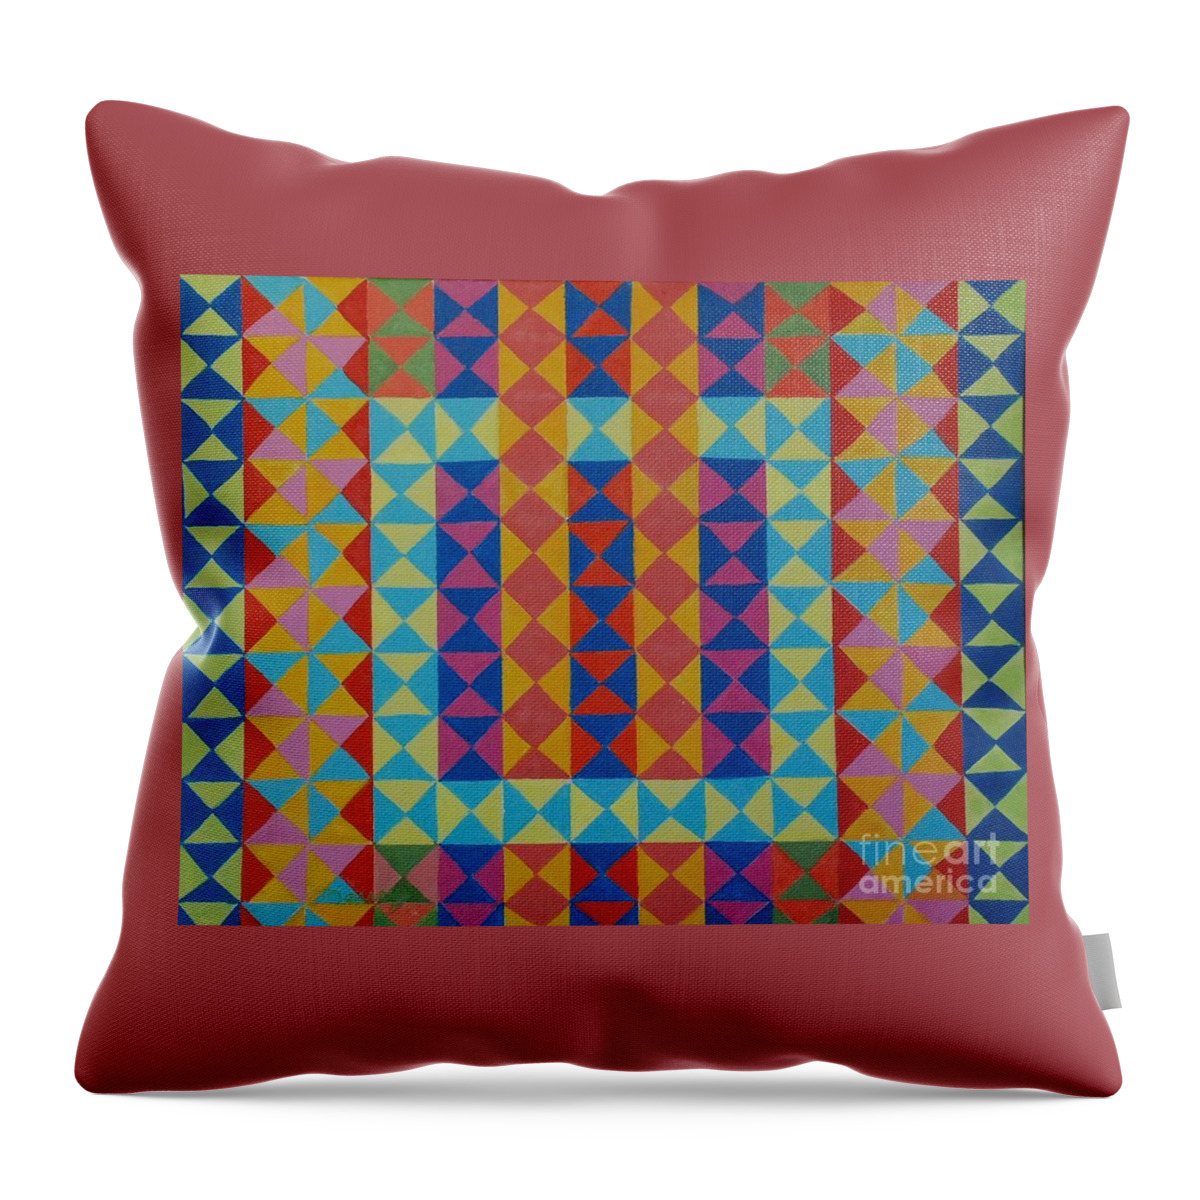 Alicia Maury Prints Throw Pillow featuring the painting Square by Alicia Maury